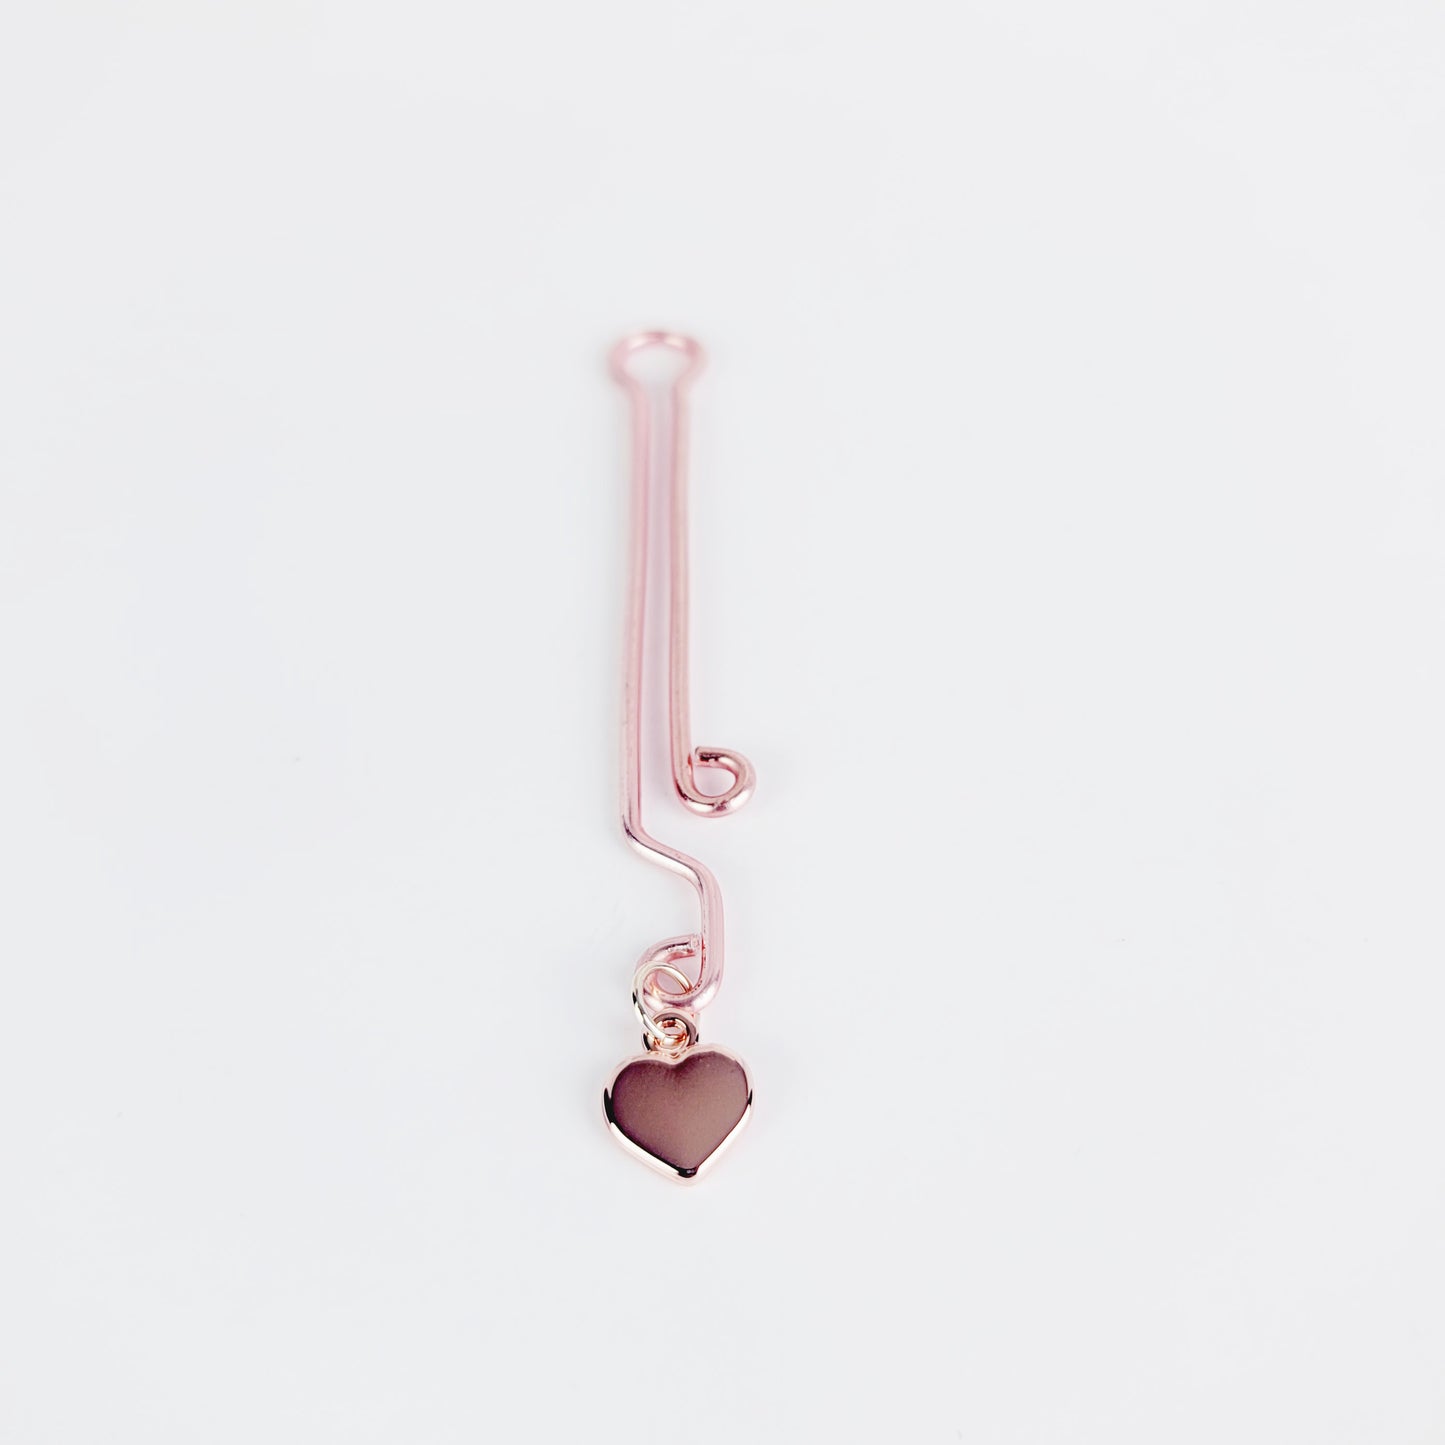 Labia Jewelry Clip with Heart, Rose Gold. Non Piercing Intimate Vaginal Jewelry.